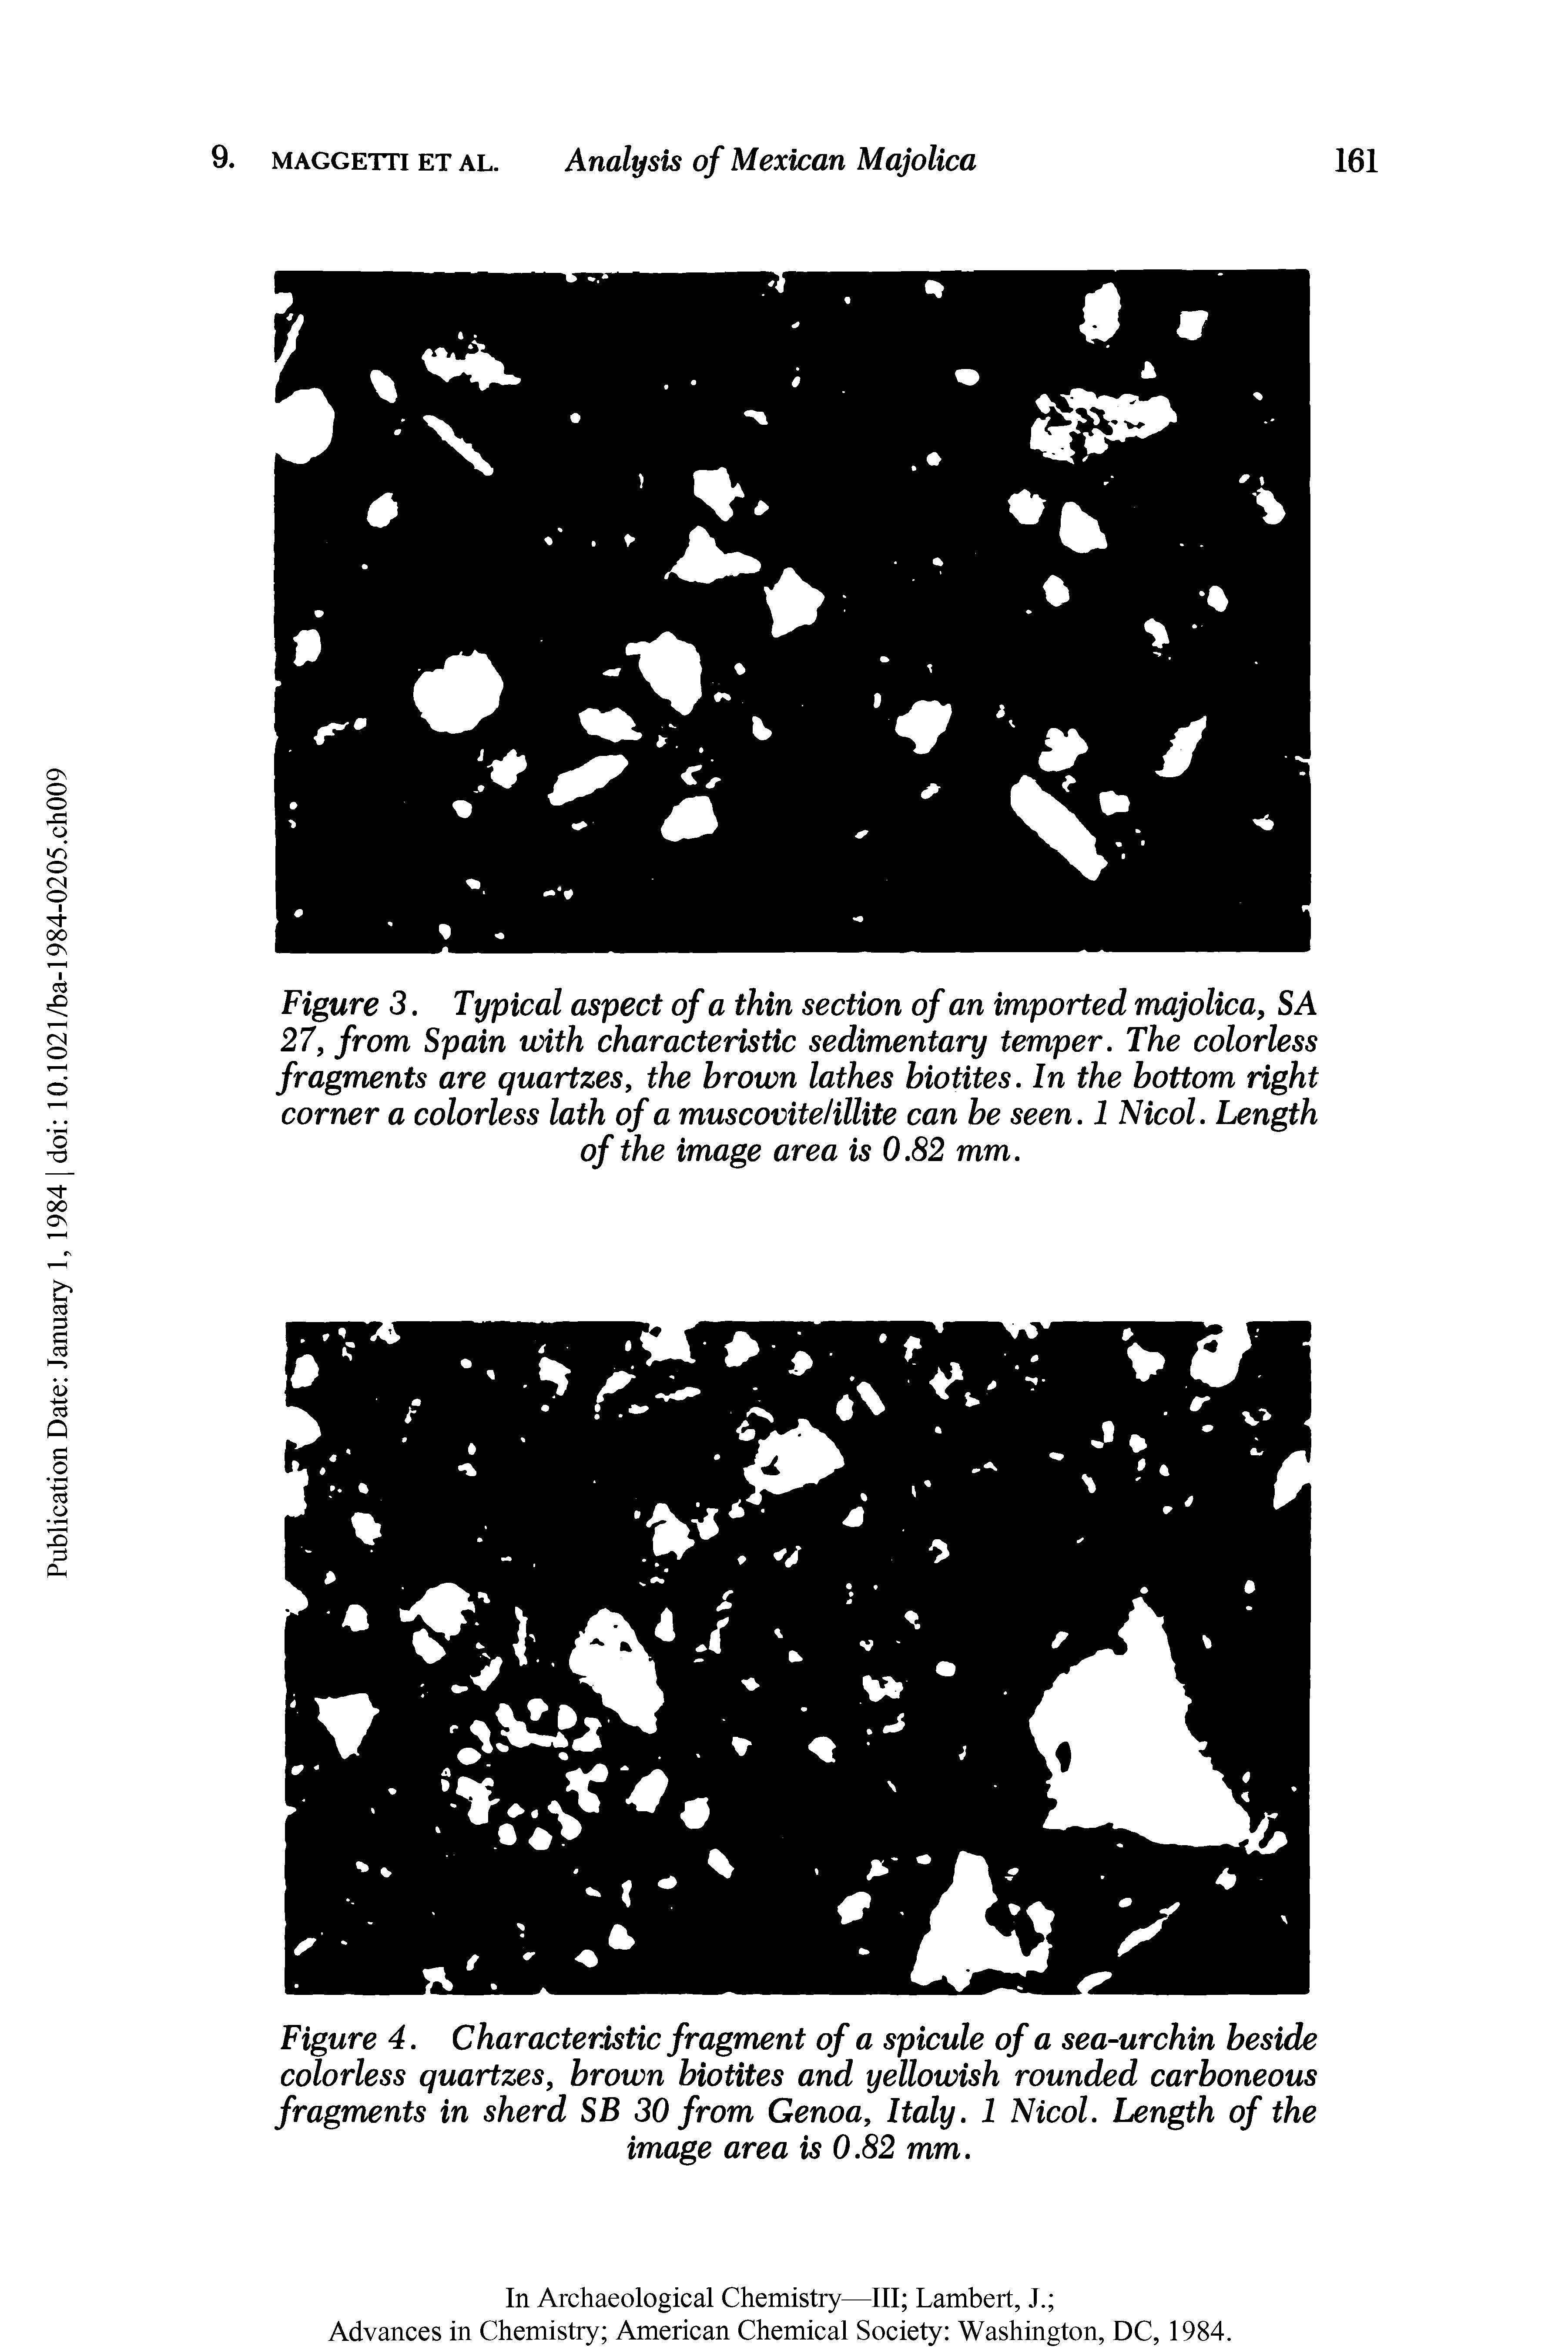 Figure 3. Typical aspect of a thin section of an imported majolica, SA 27, from Spain with characteristic sedimentary temper. The colorless fragments are quartzes, the brown lathes biotites. In the bottom right corner a colorless lath of a muscovite illite can be seen. 1 Nicol. Length of the image area is 0.82 mm.